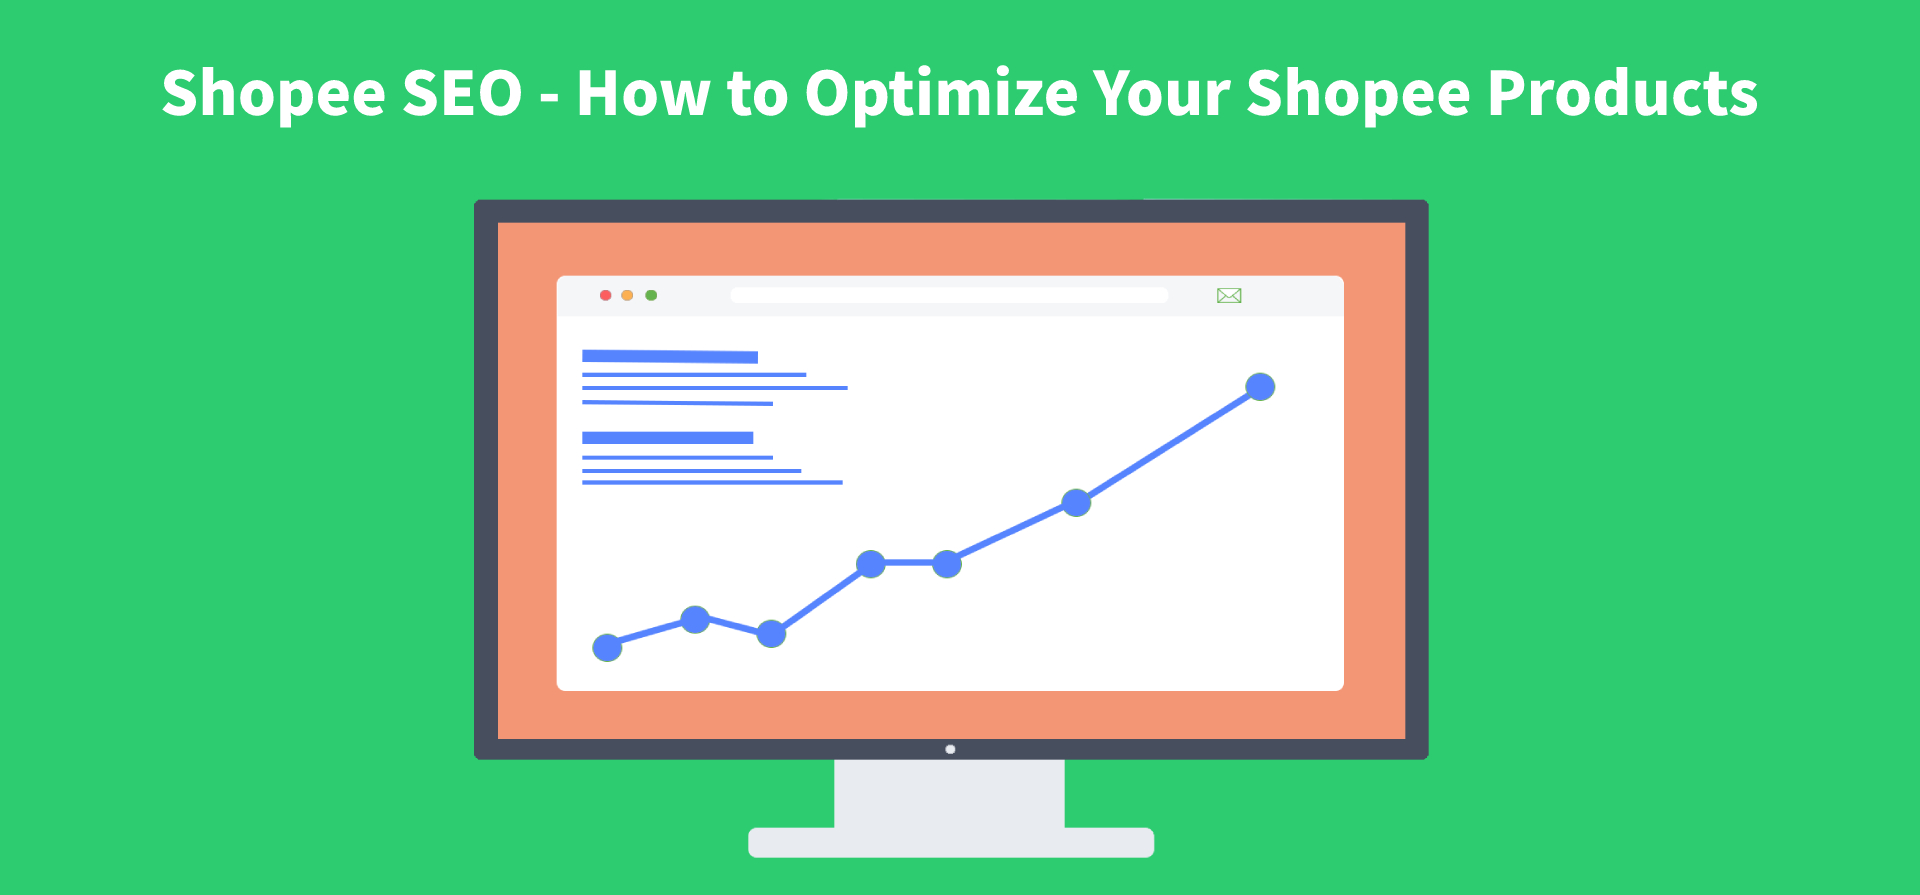 Shopee SEO - How to Optimize Your Shopee Products